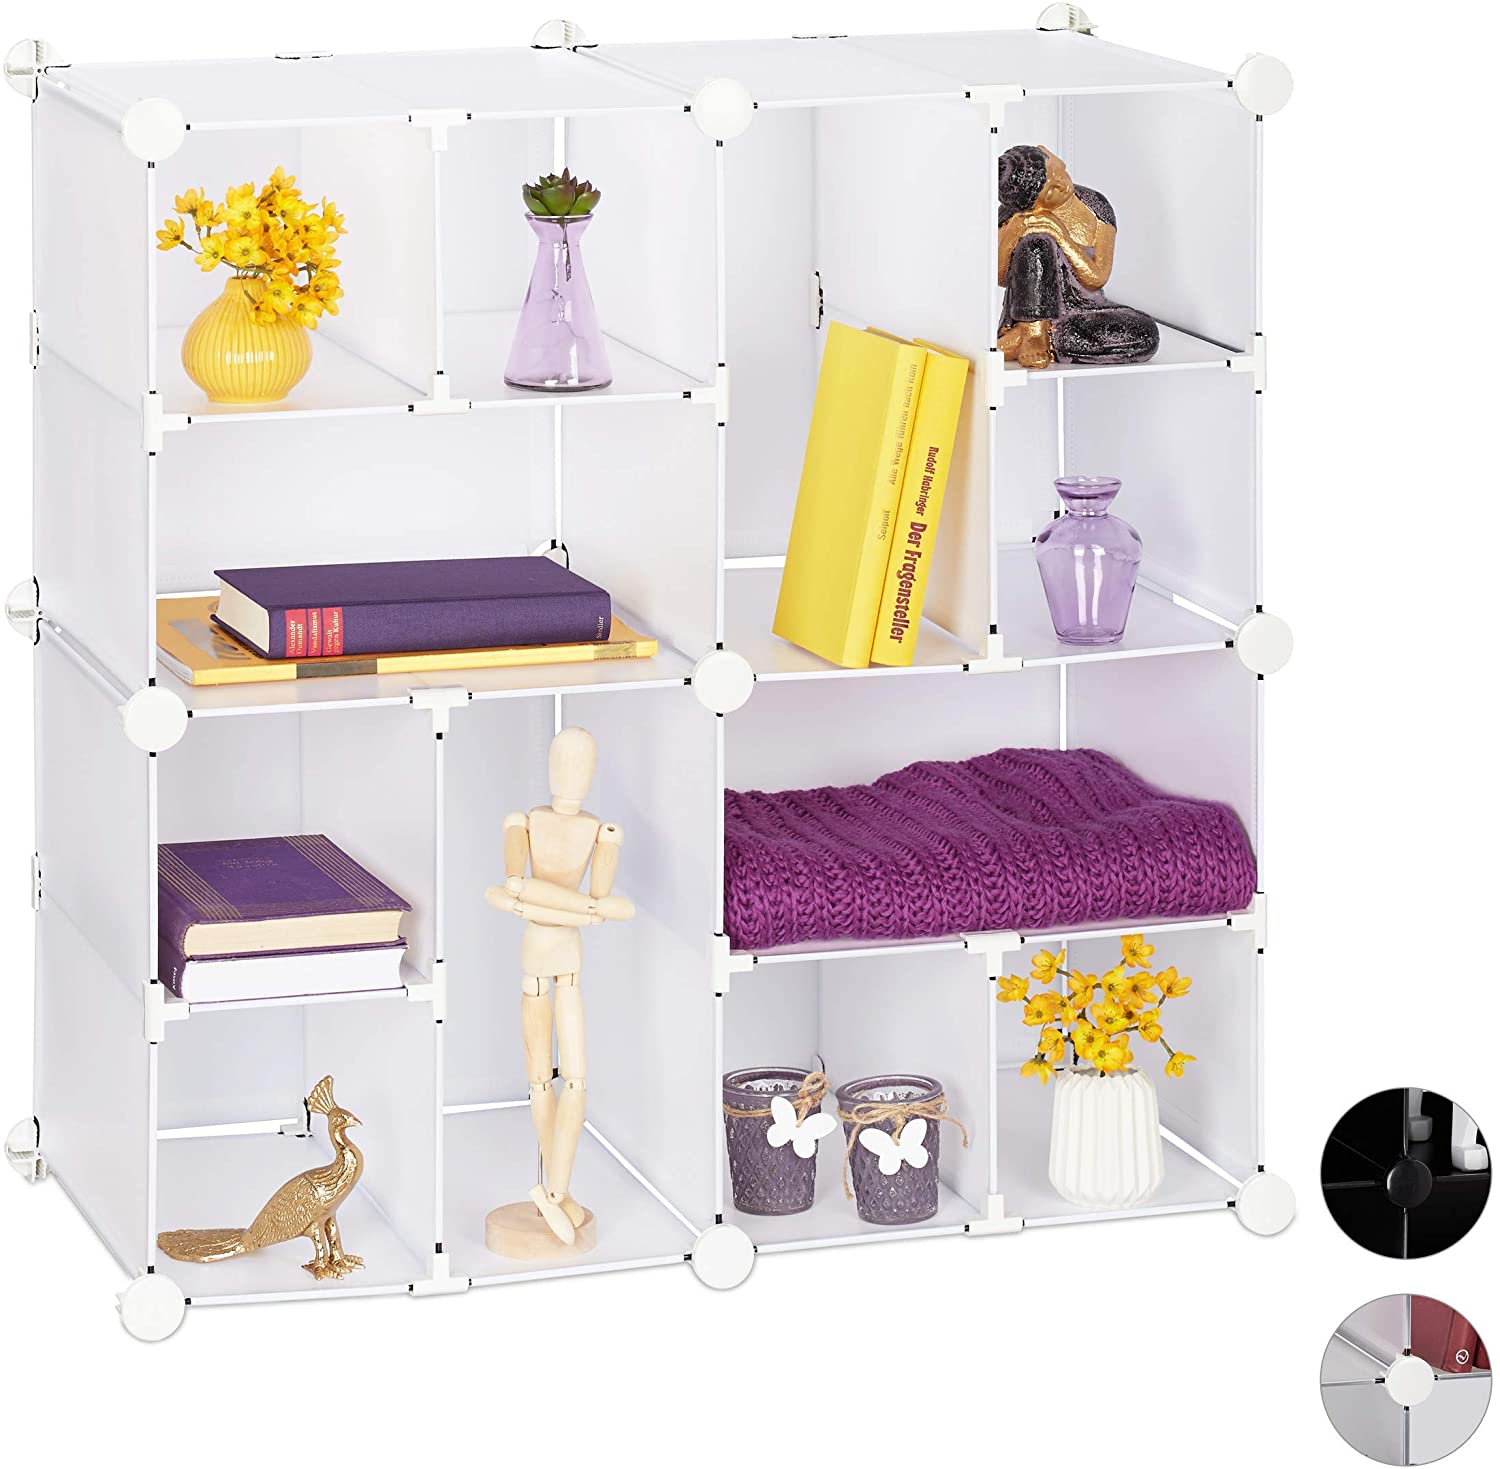 Relaxdays 12 Compartments Open Shelf System Plastic Shelving System 75 X 75